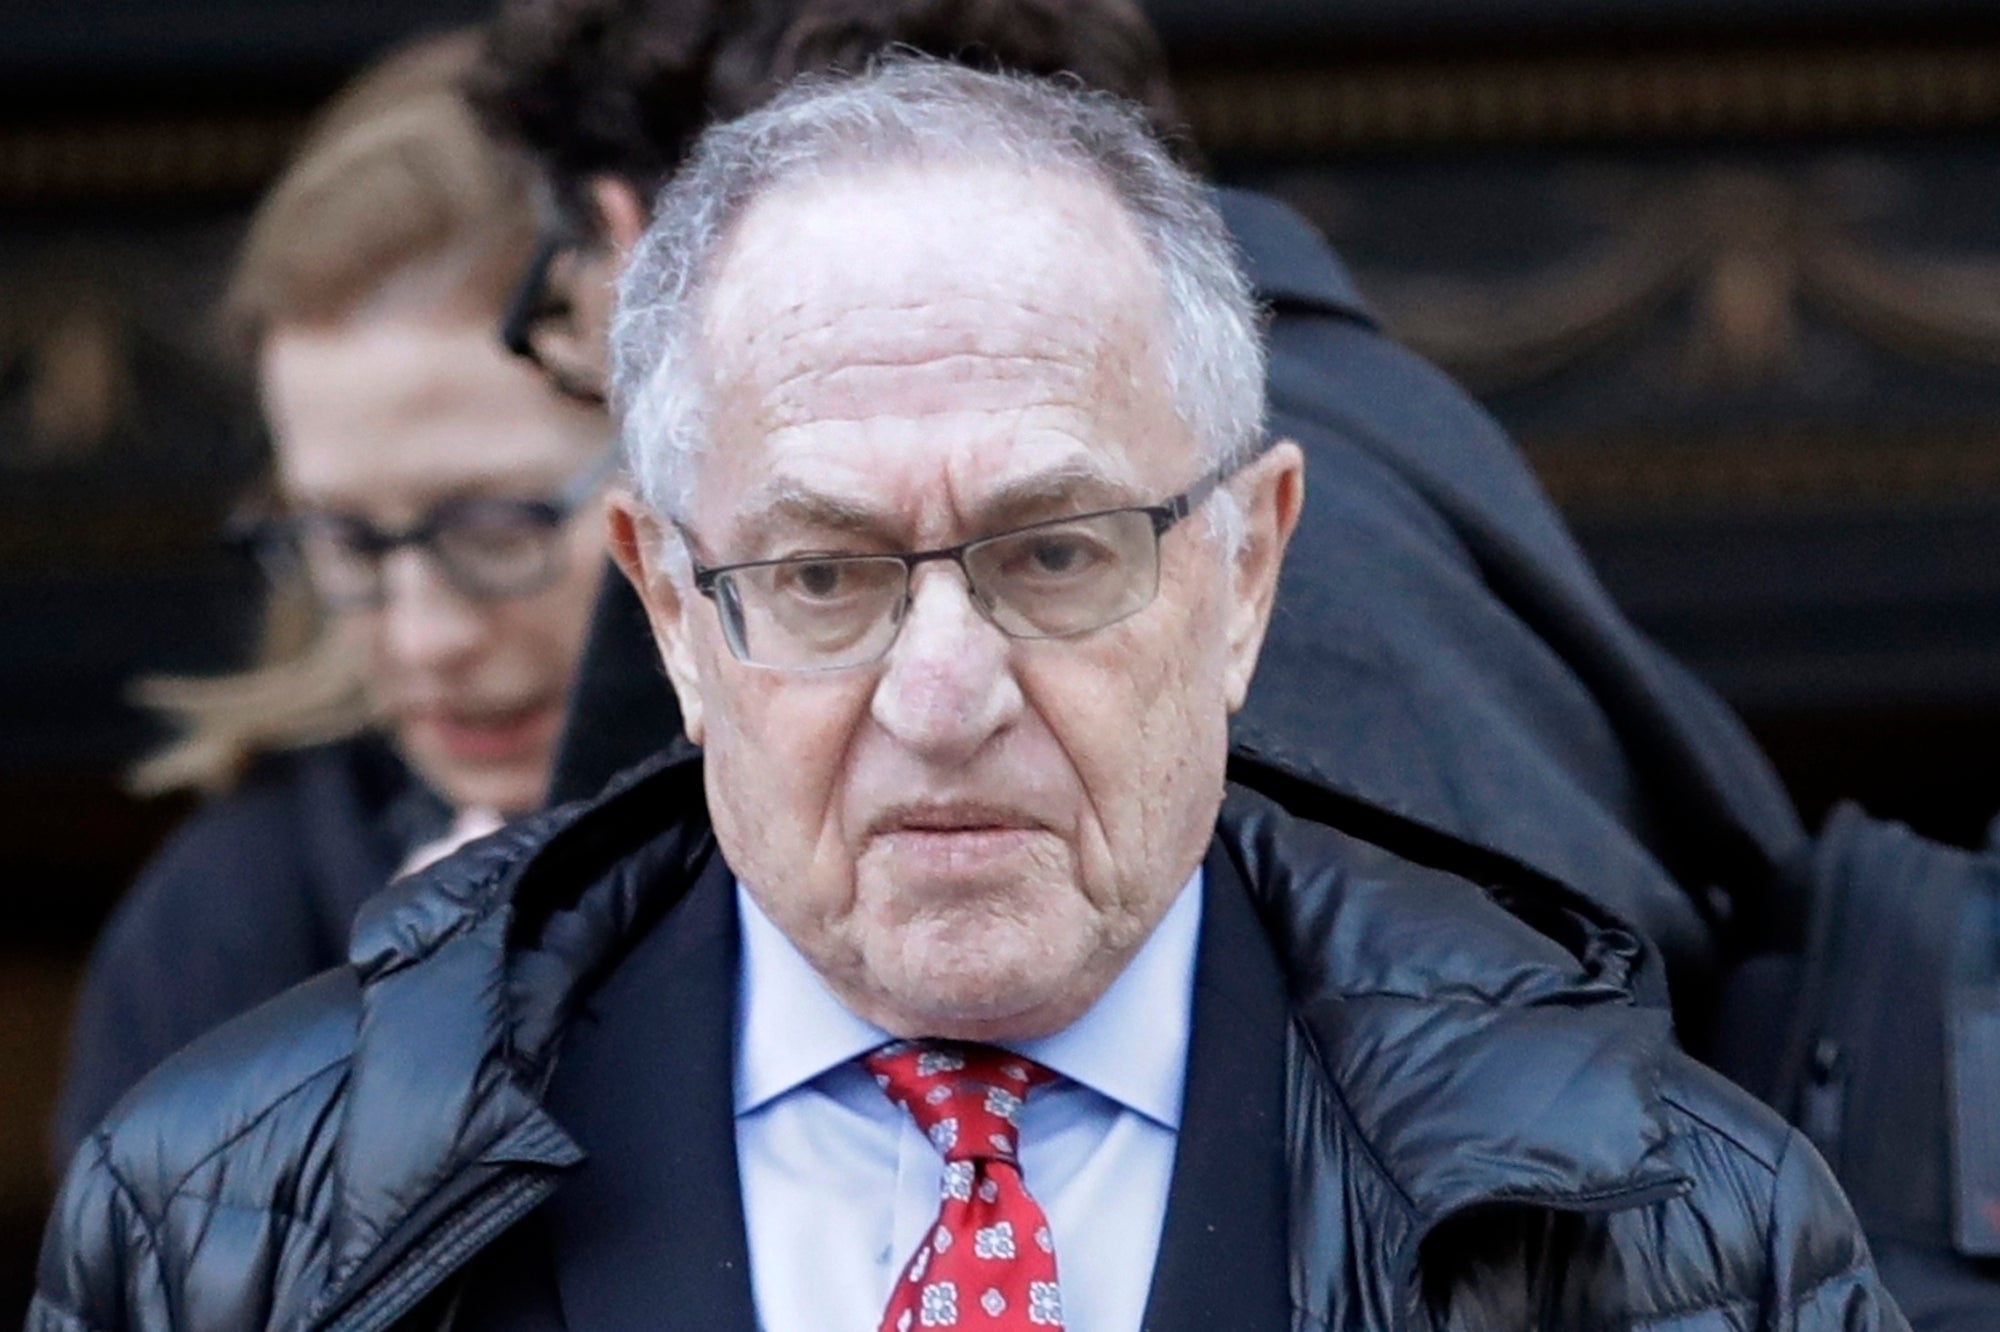 Alan Dershowitz has consistently maintained his innocence